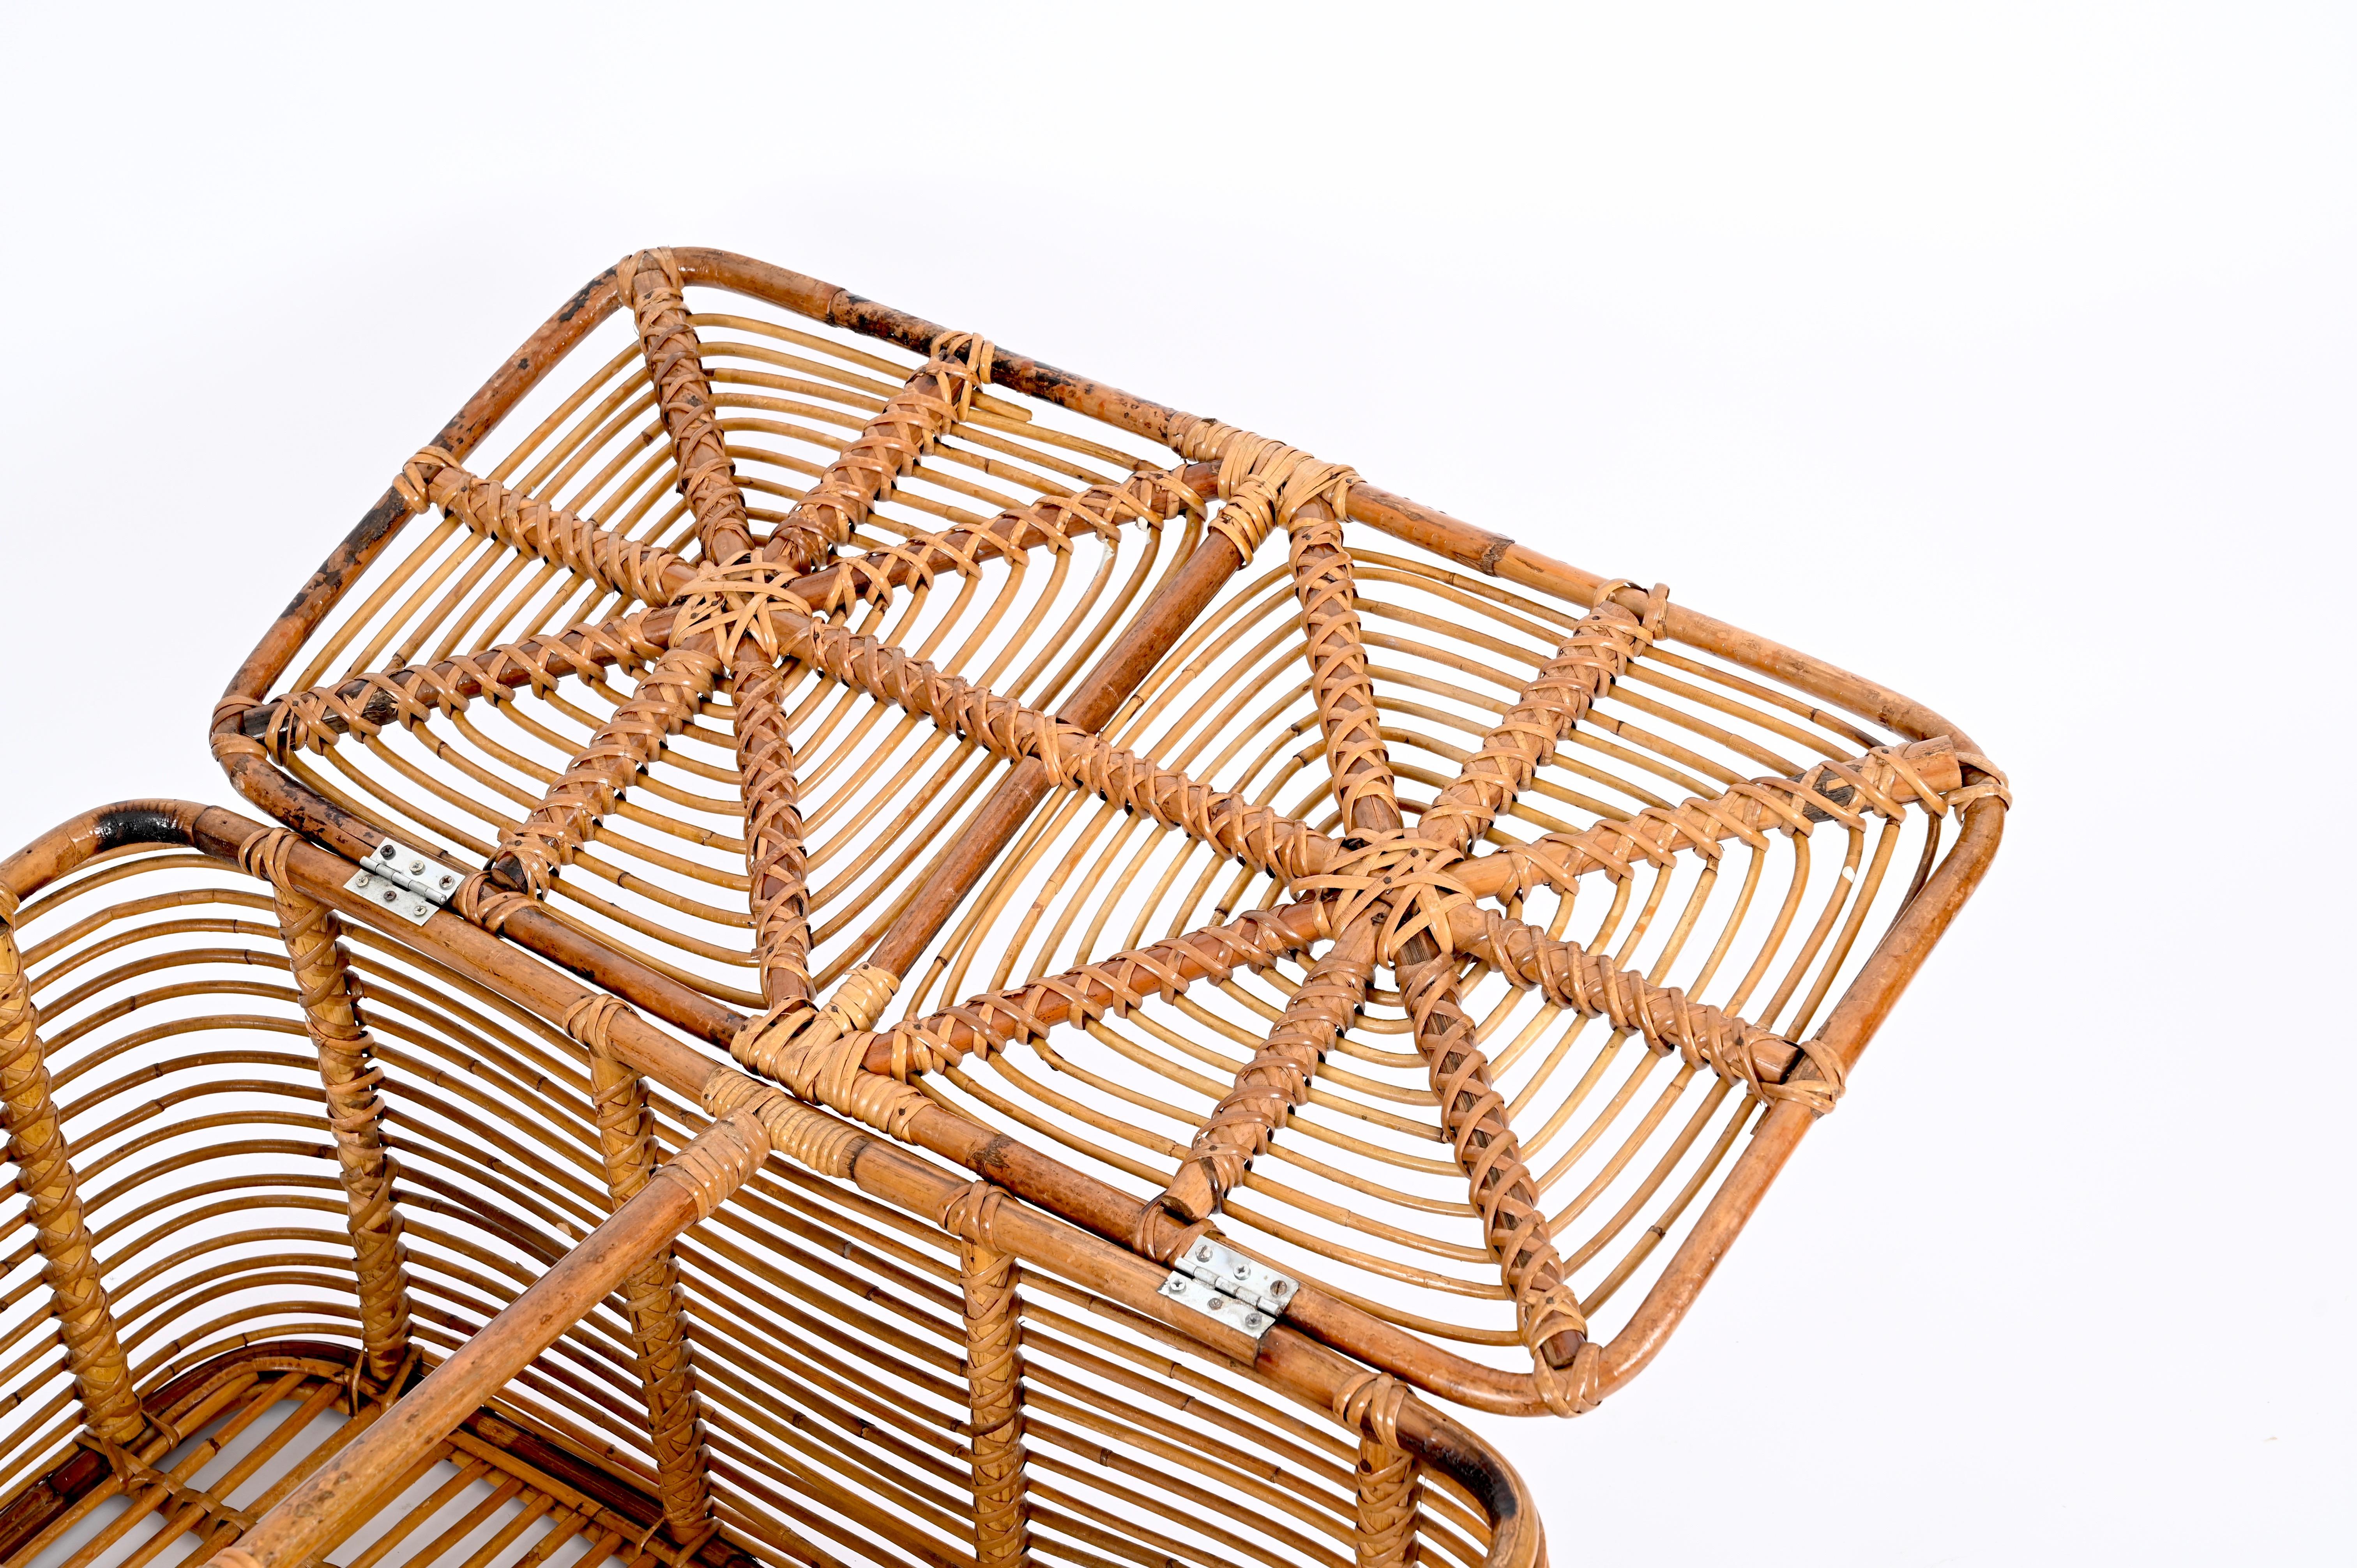 Midcentury French Riviera Bamboo and Woven Rattan Italian Basket, 1960s For Sale 3